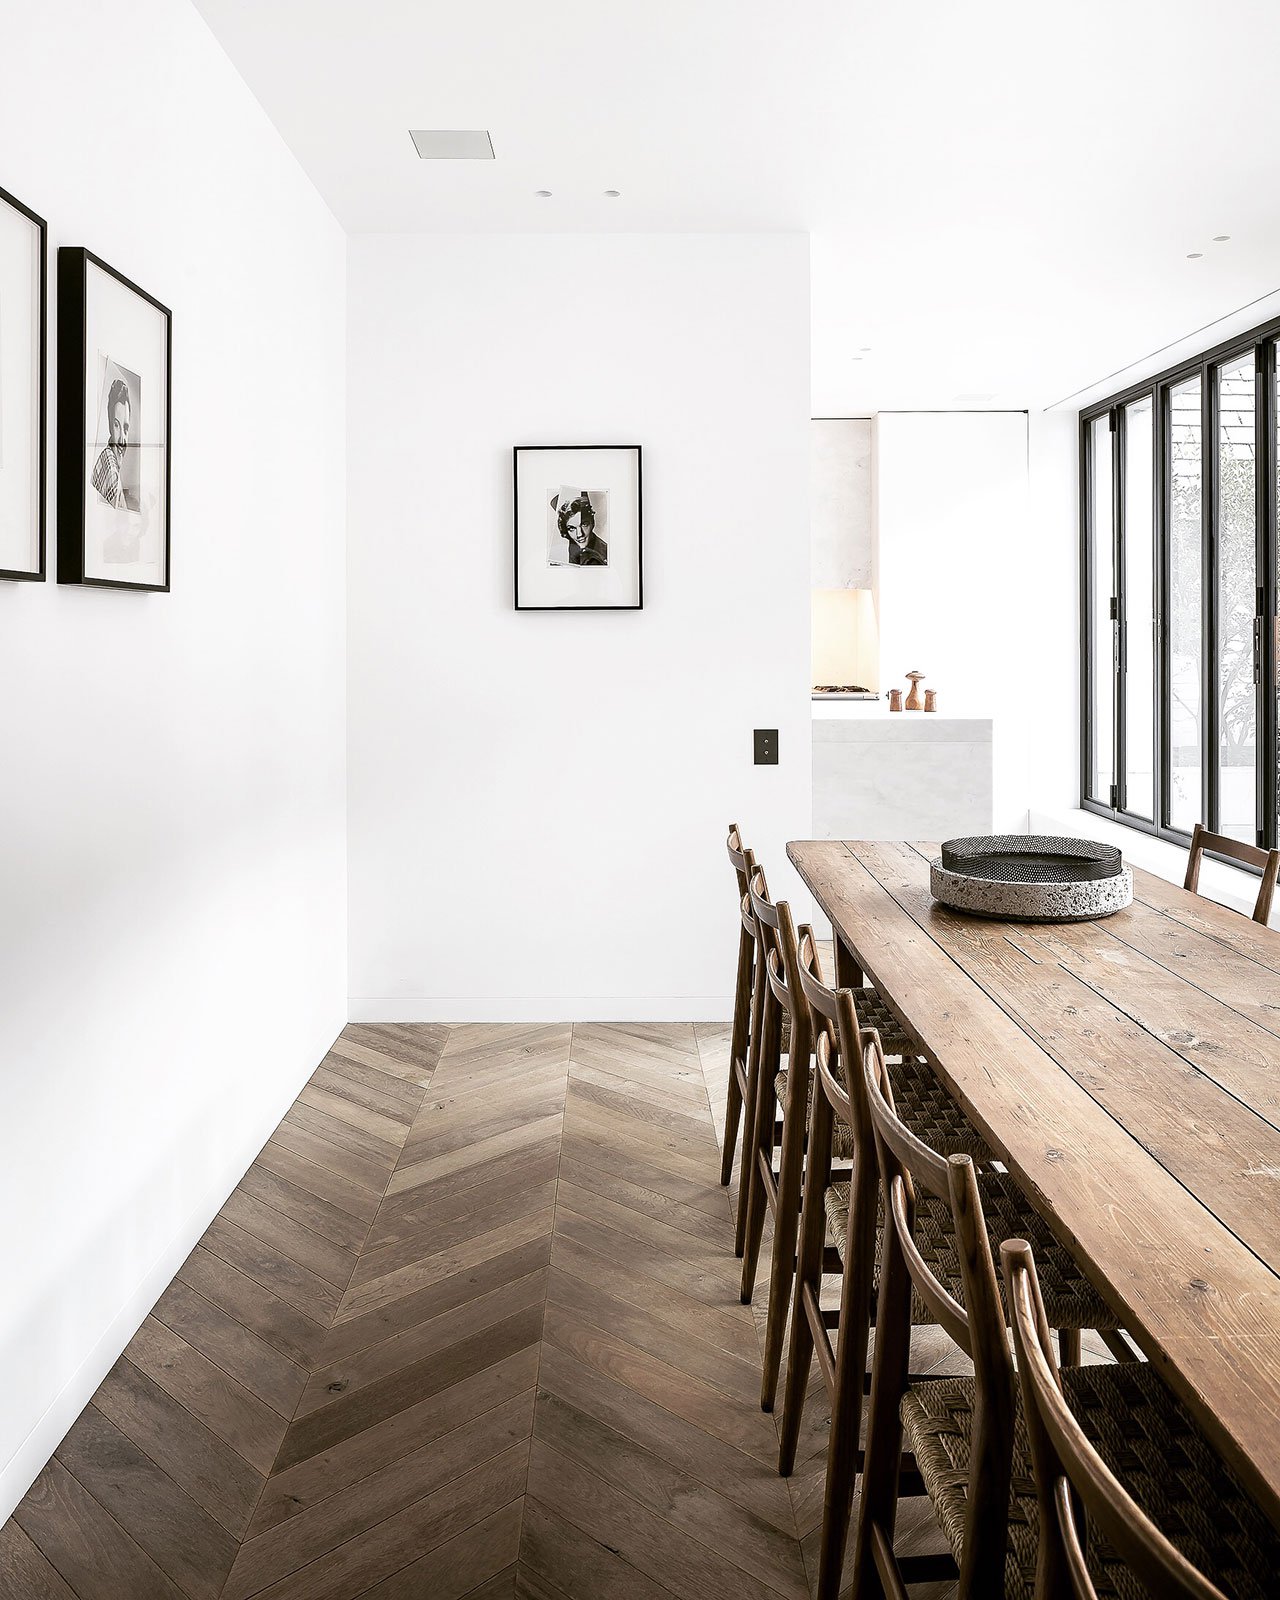 The dining space with a rustic wooden dining set is separated from the kitchen with a half wall